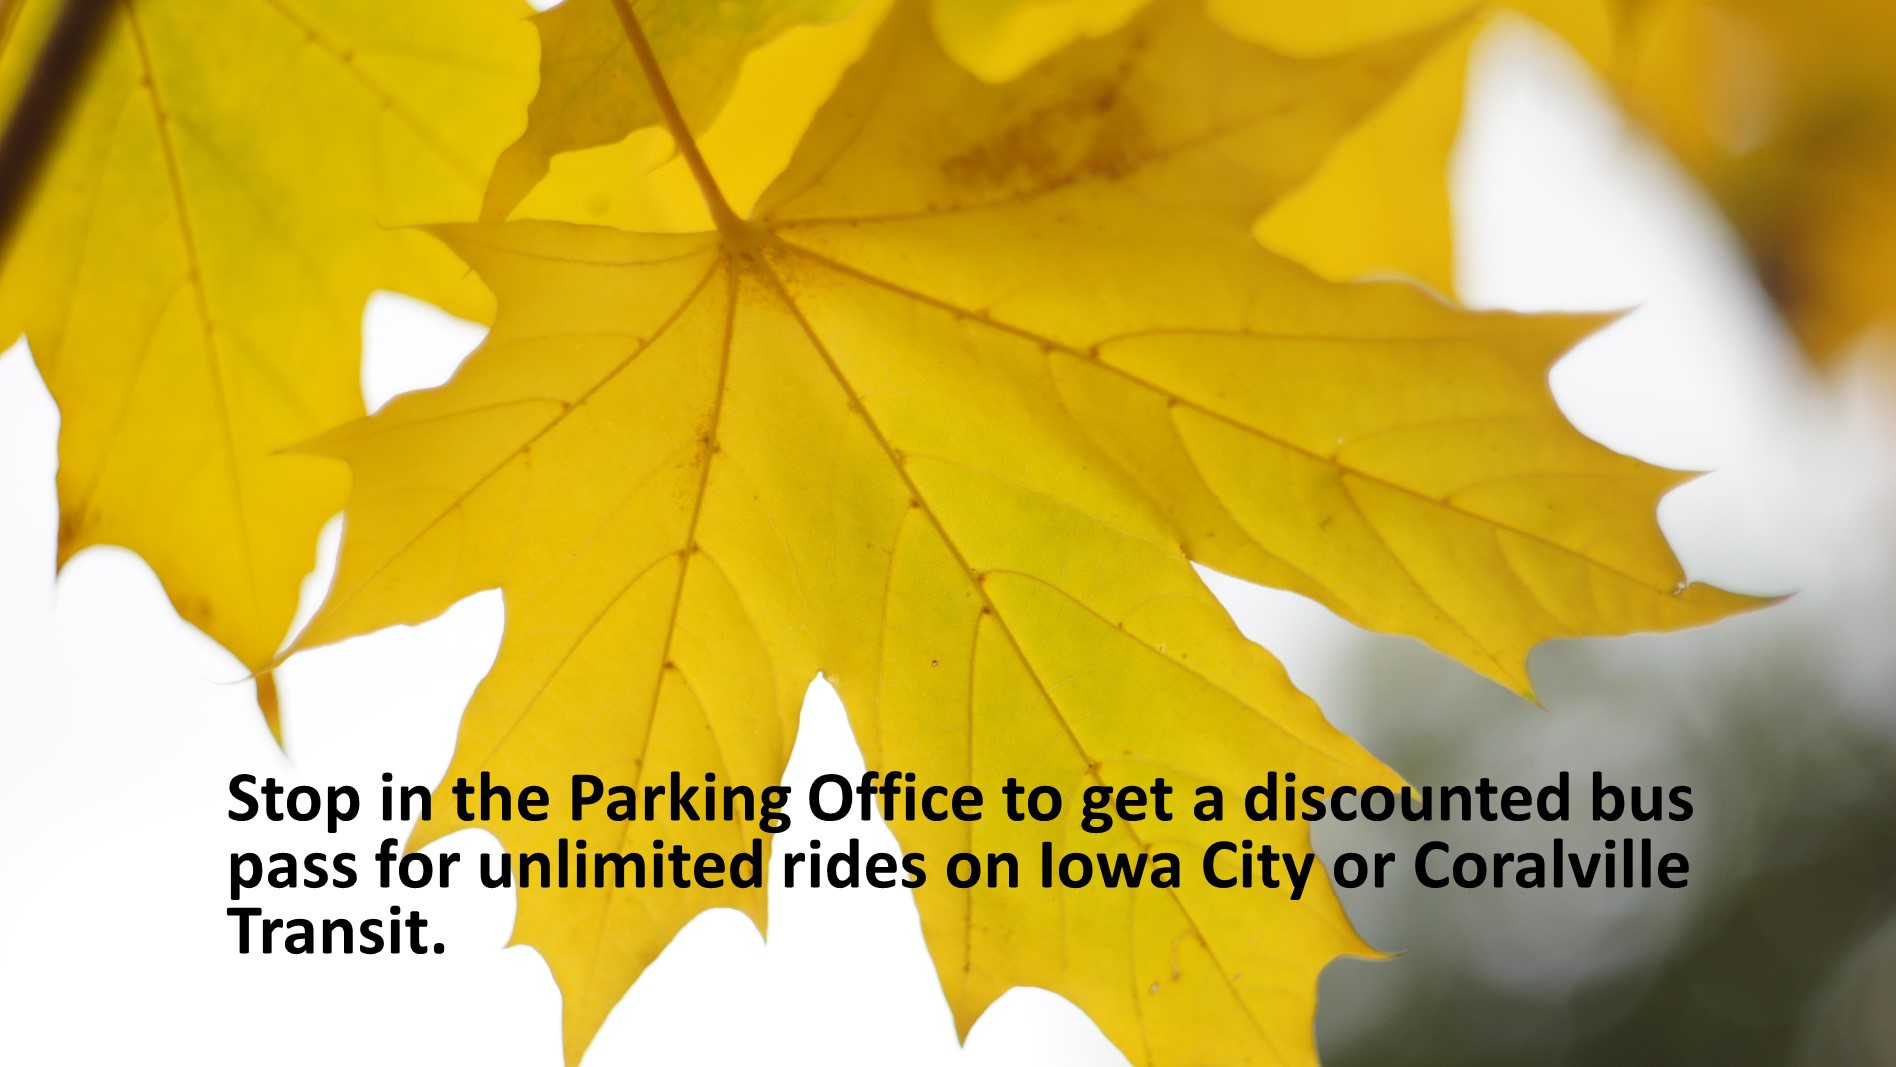 Get discounted bus passes in the Parking Office